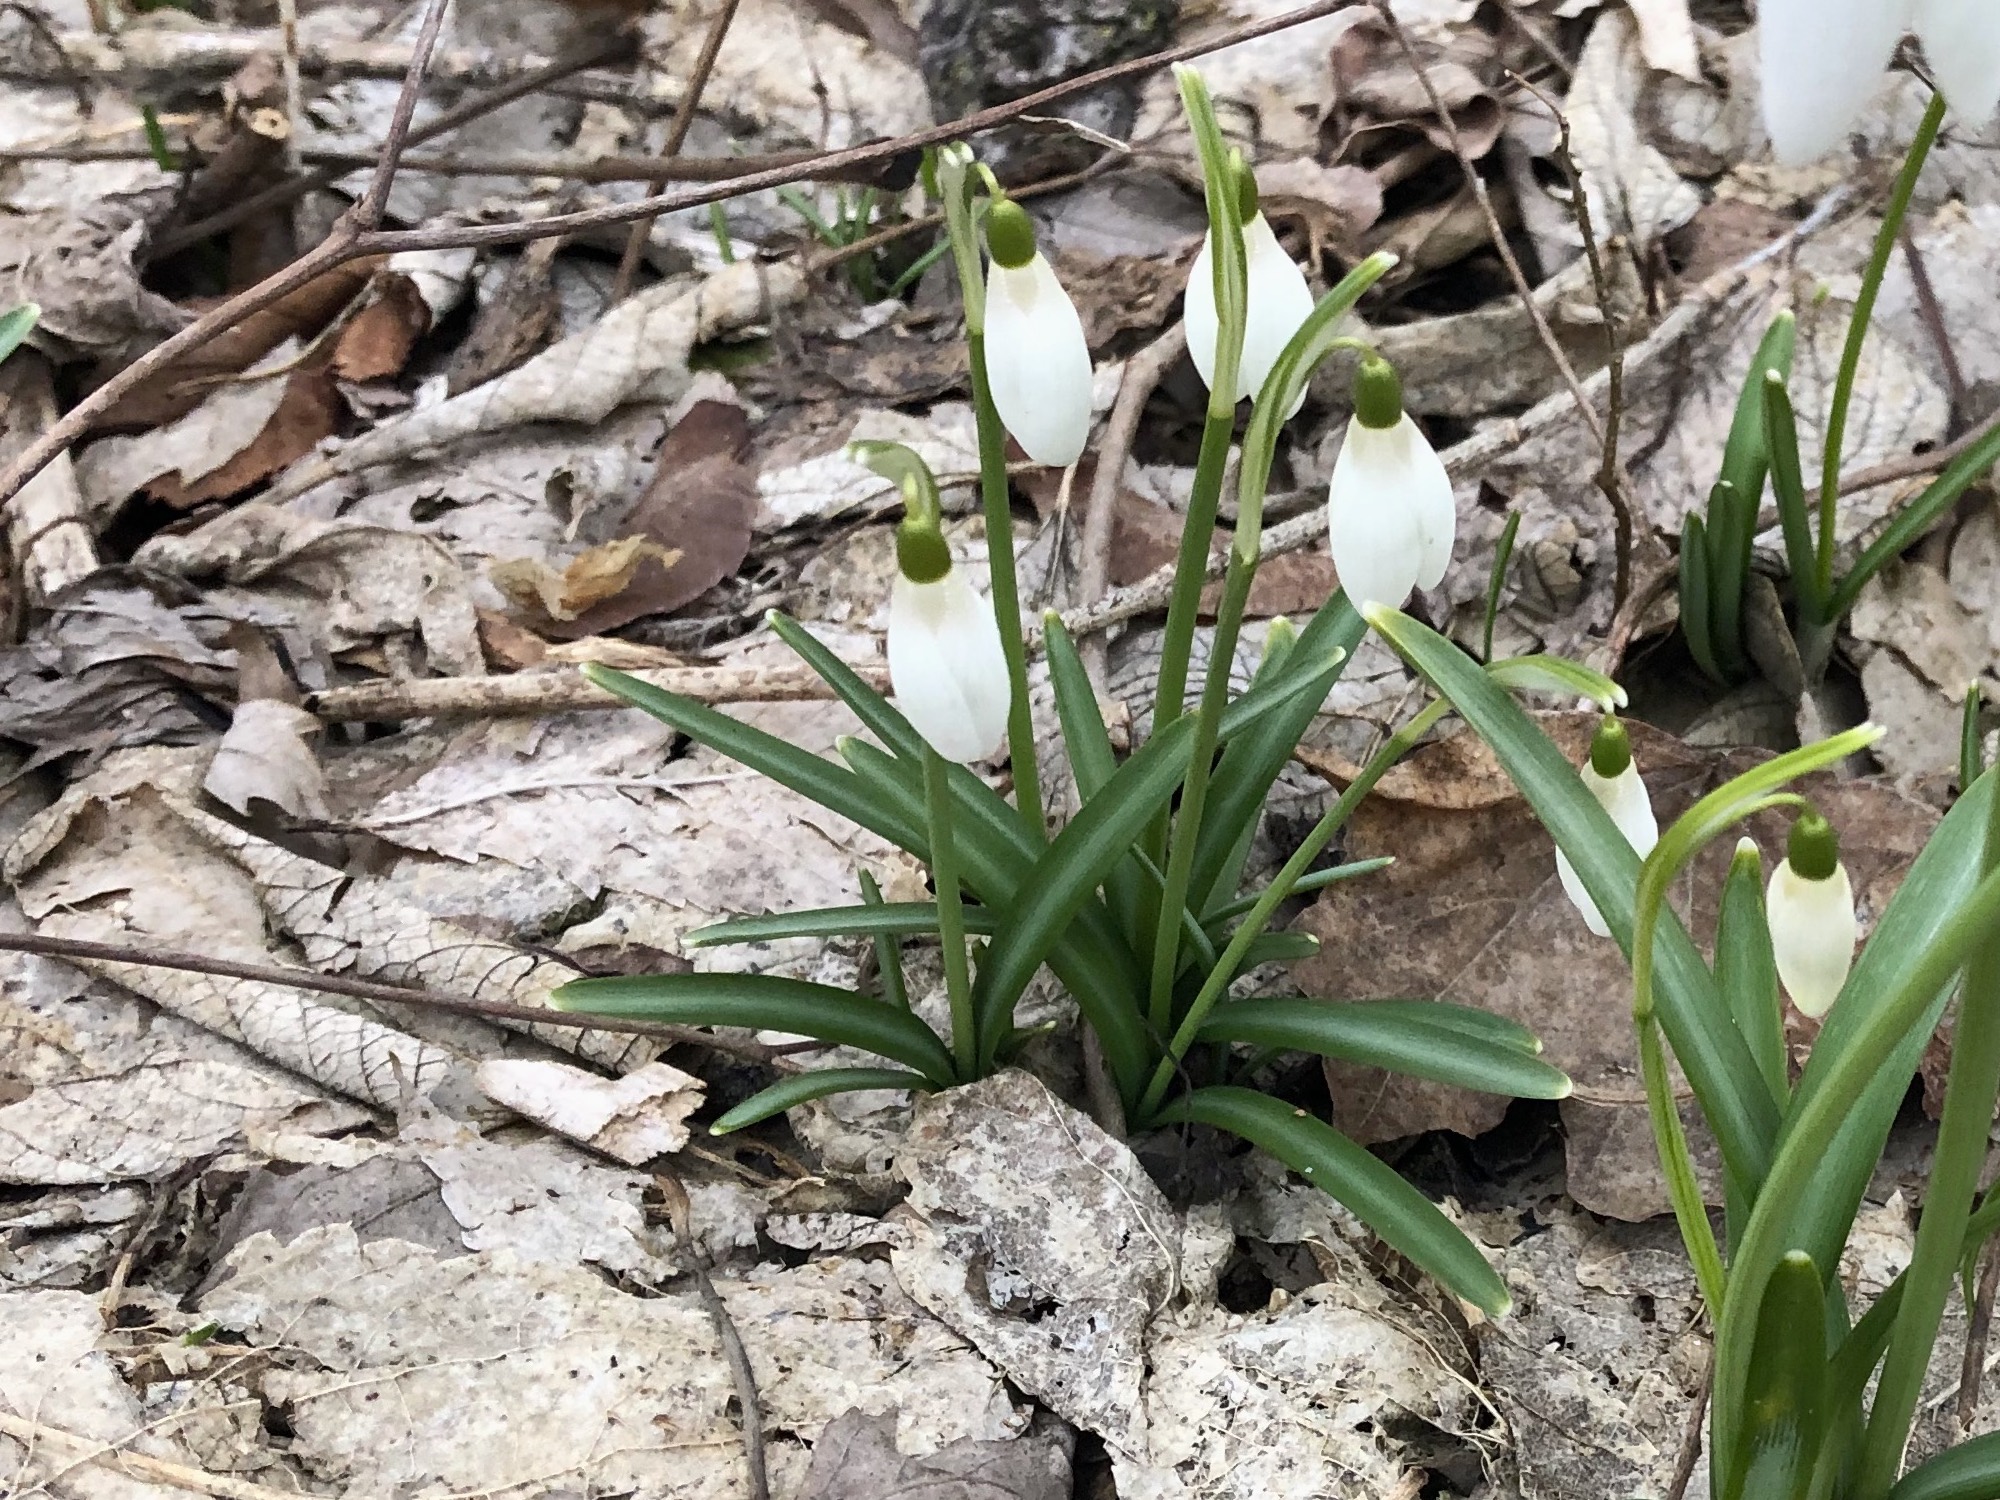 Snowdrops in woods between the Sycamore Tree on Arbor Drive in Madison, Wisconsin on March 14, 2020.